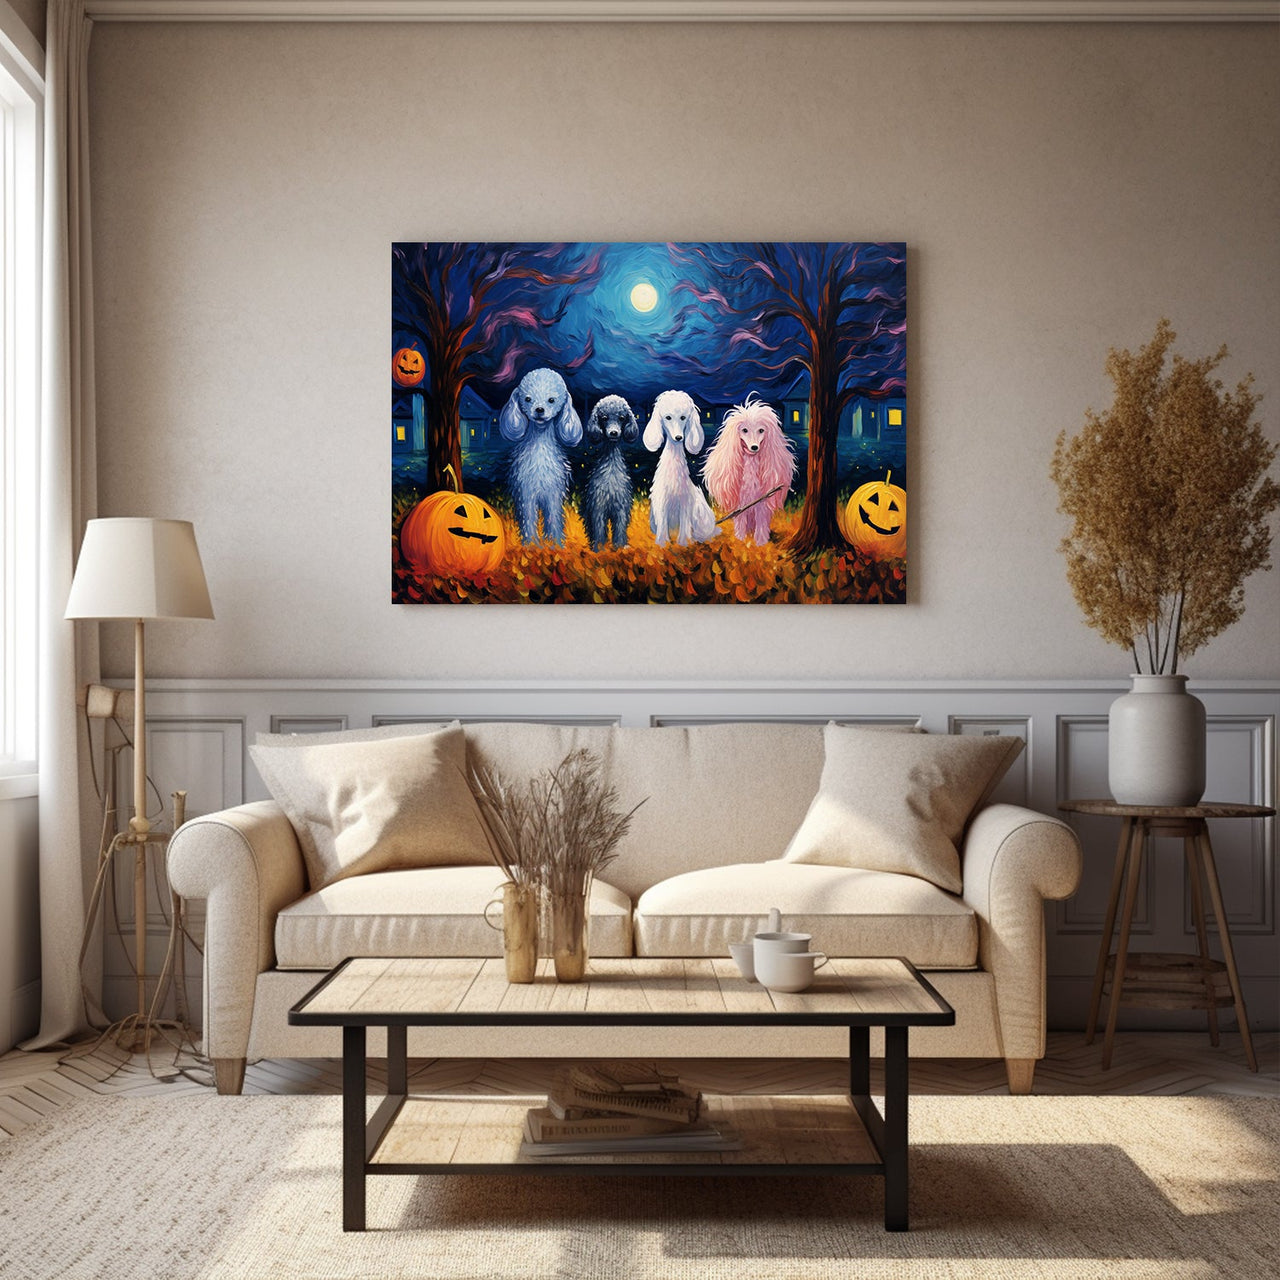 Poodle Dog Halloween With Pumpkin Oil Painting Van Goh Style, Wooden Canvas Prints Wall Art Painting , Canvas 3d Art